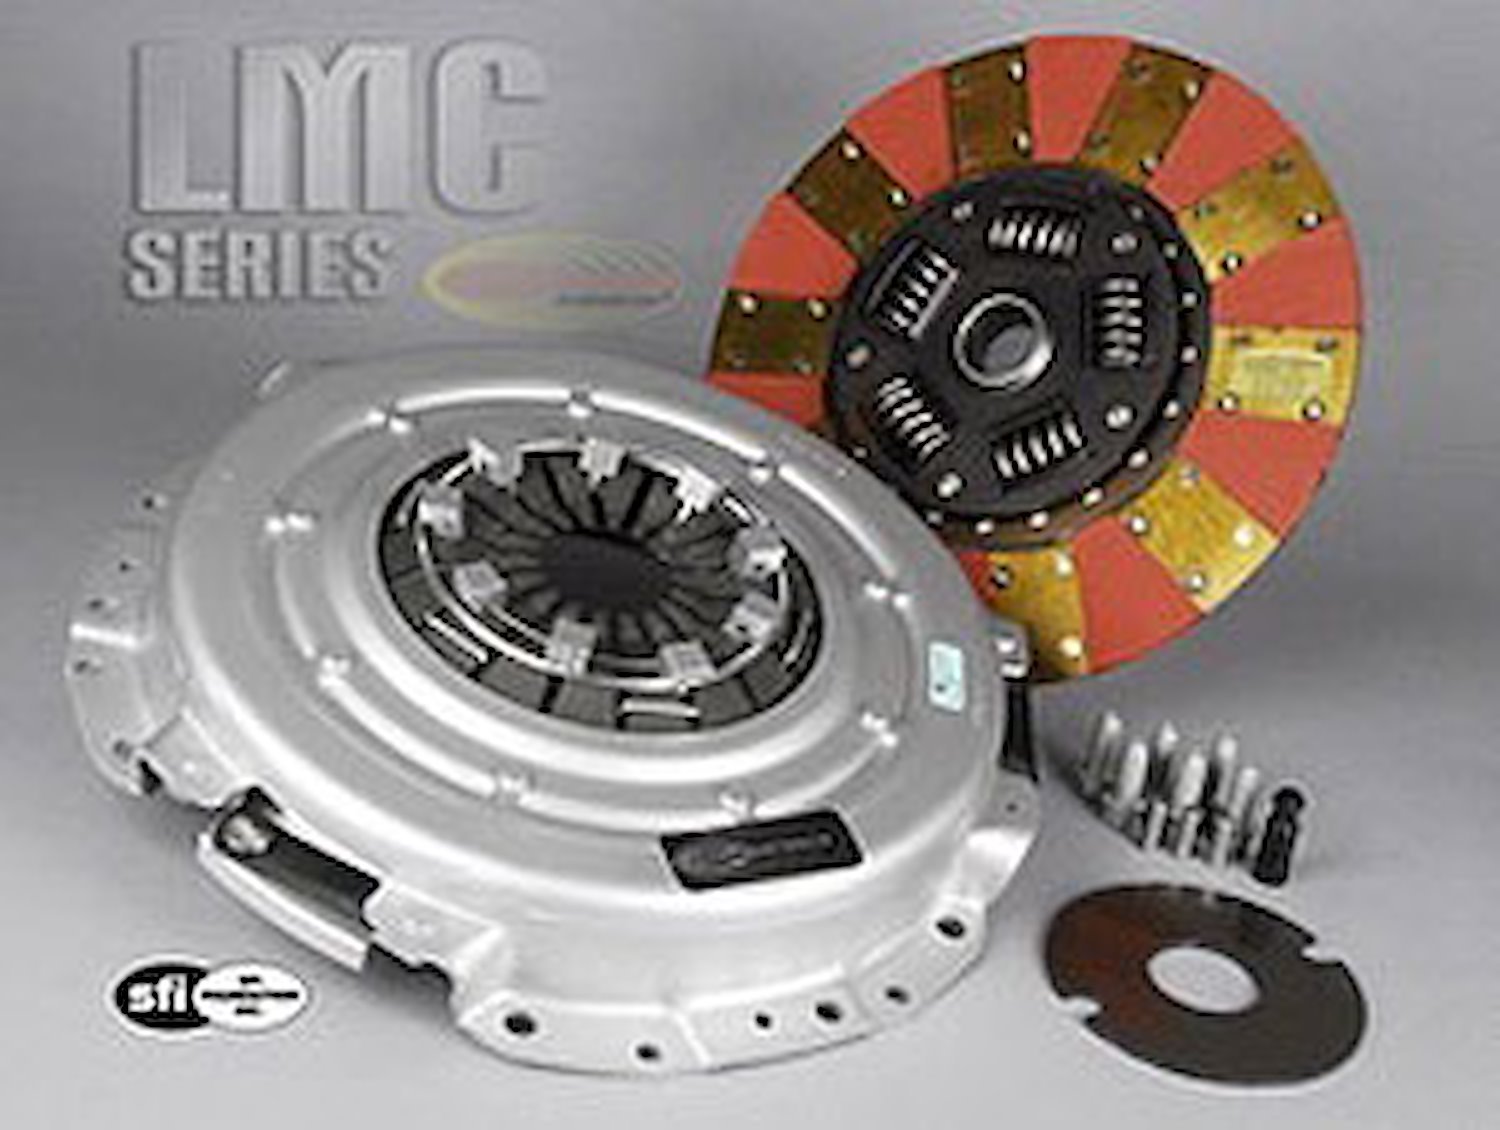 LMC Series Clutch Kit Includes Pressure Plate, Disc, Bolts, Dowel Pins, Shim and Bleed Kit